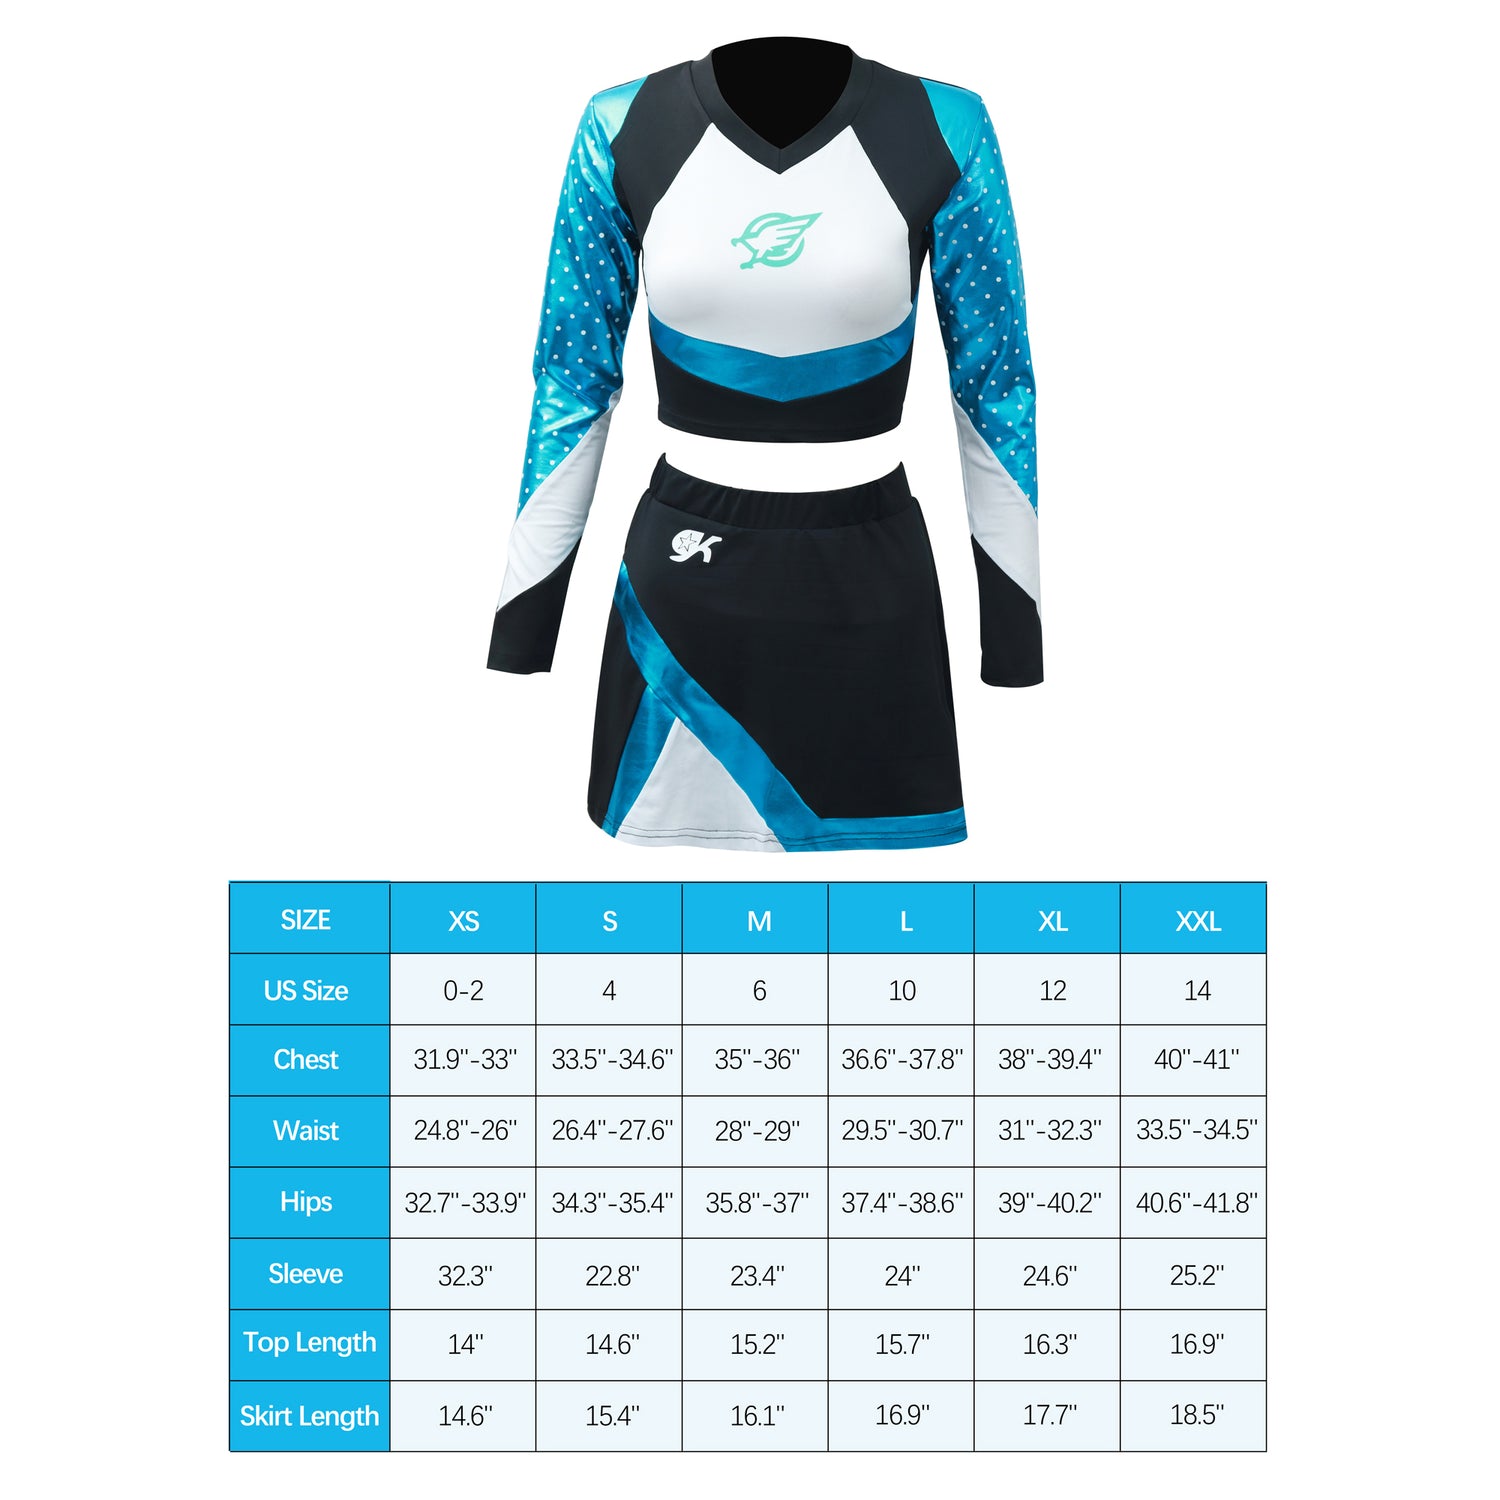 DAZCOS Maddy Perez Cheerleader Cosplay Outfits Long Sleeve School Cheer Uniform Costume for Women